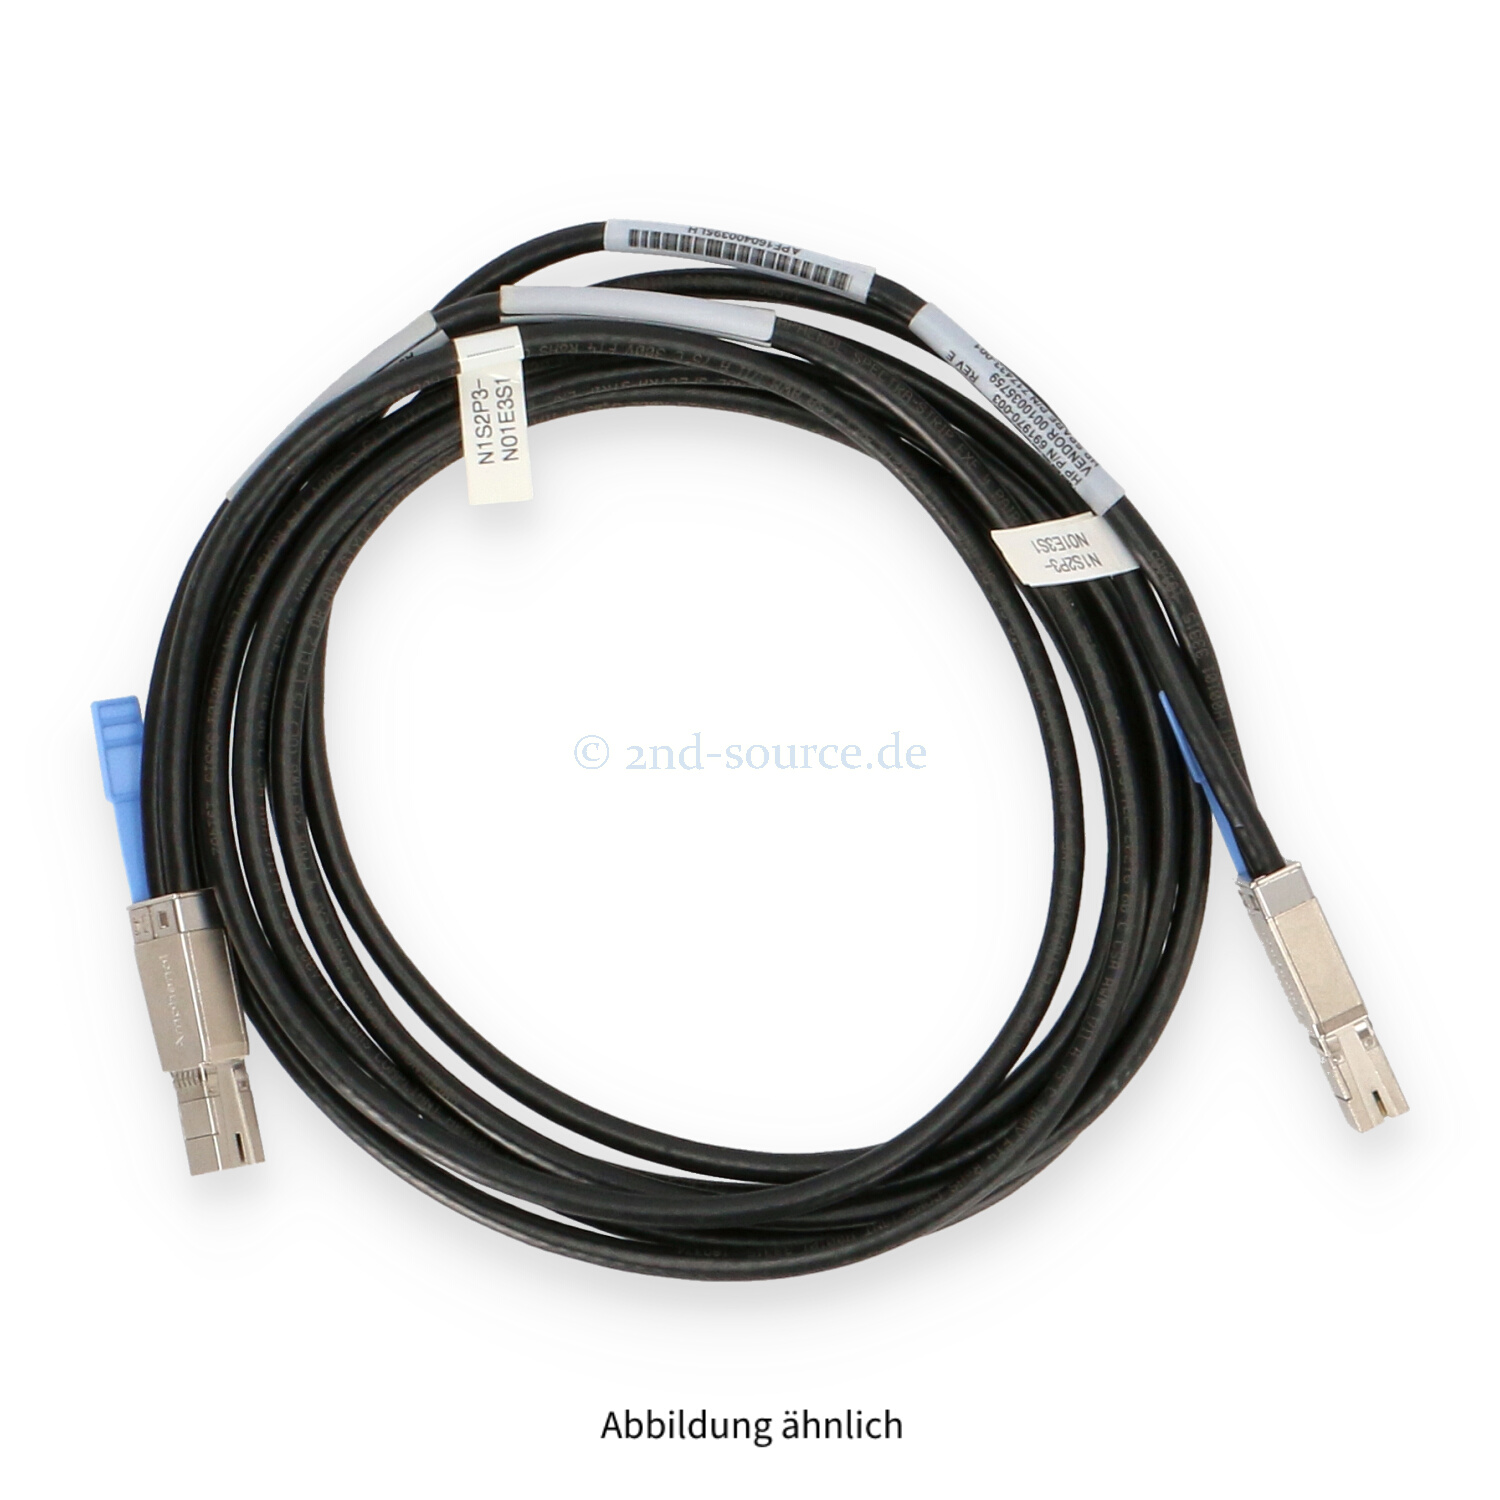 HPE 2.0m SFF-8643 to SFF-8643 SAS Cable 716197-B21 717433-001